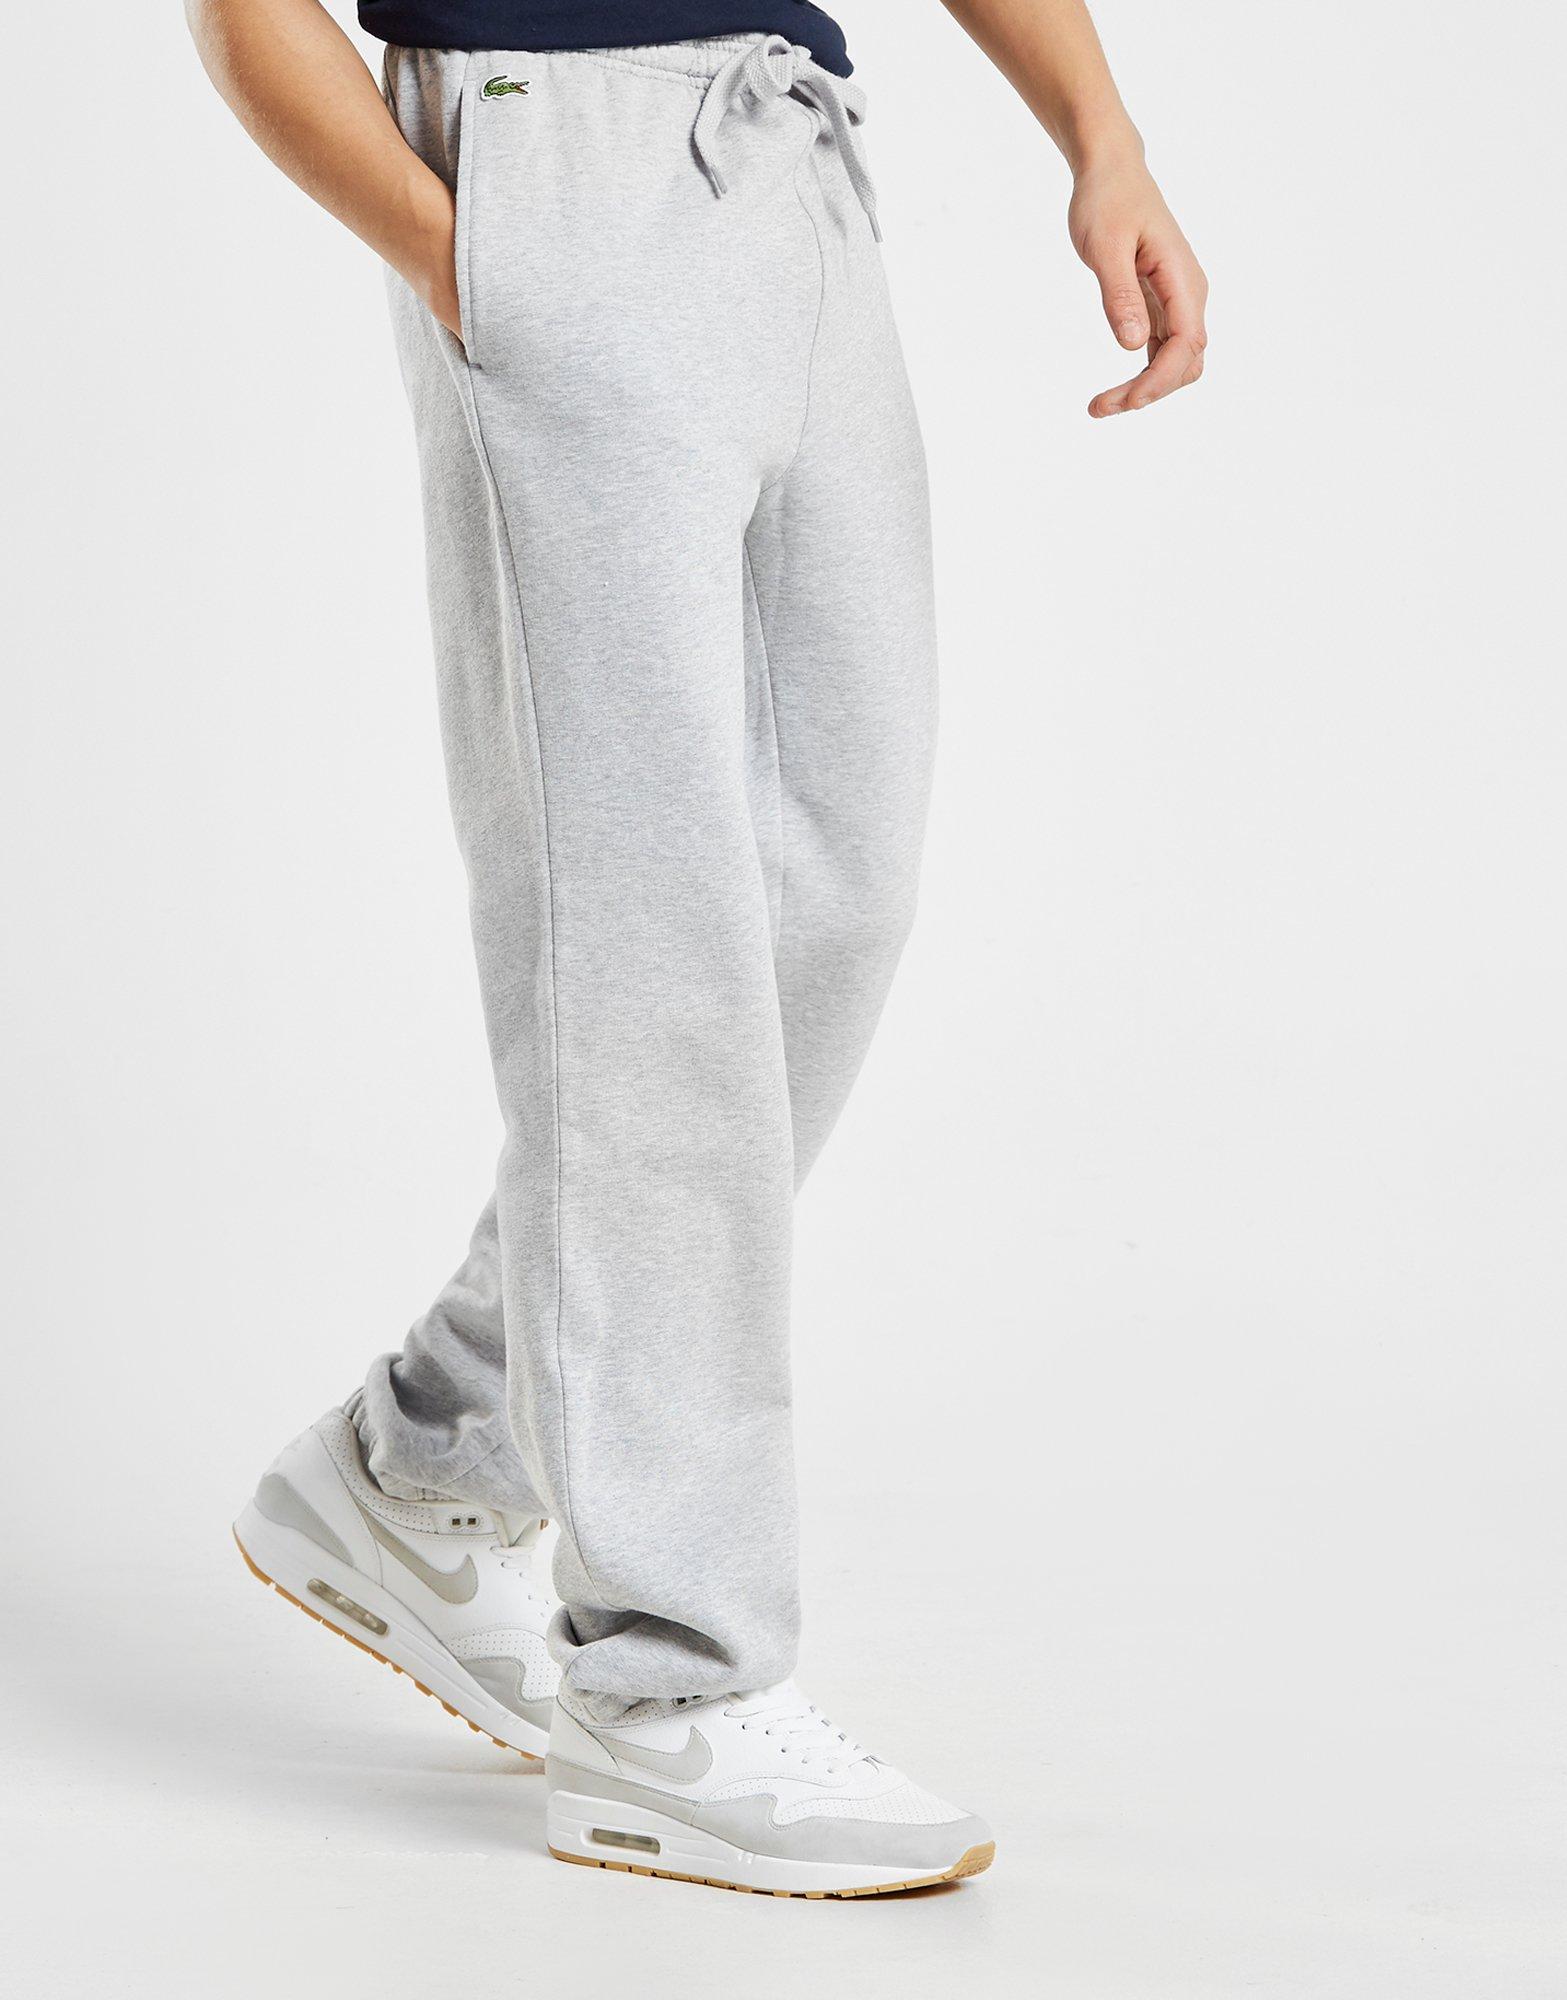 jd lacoste joggers